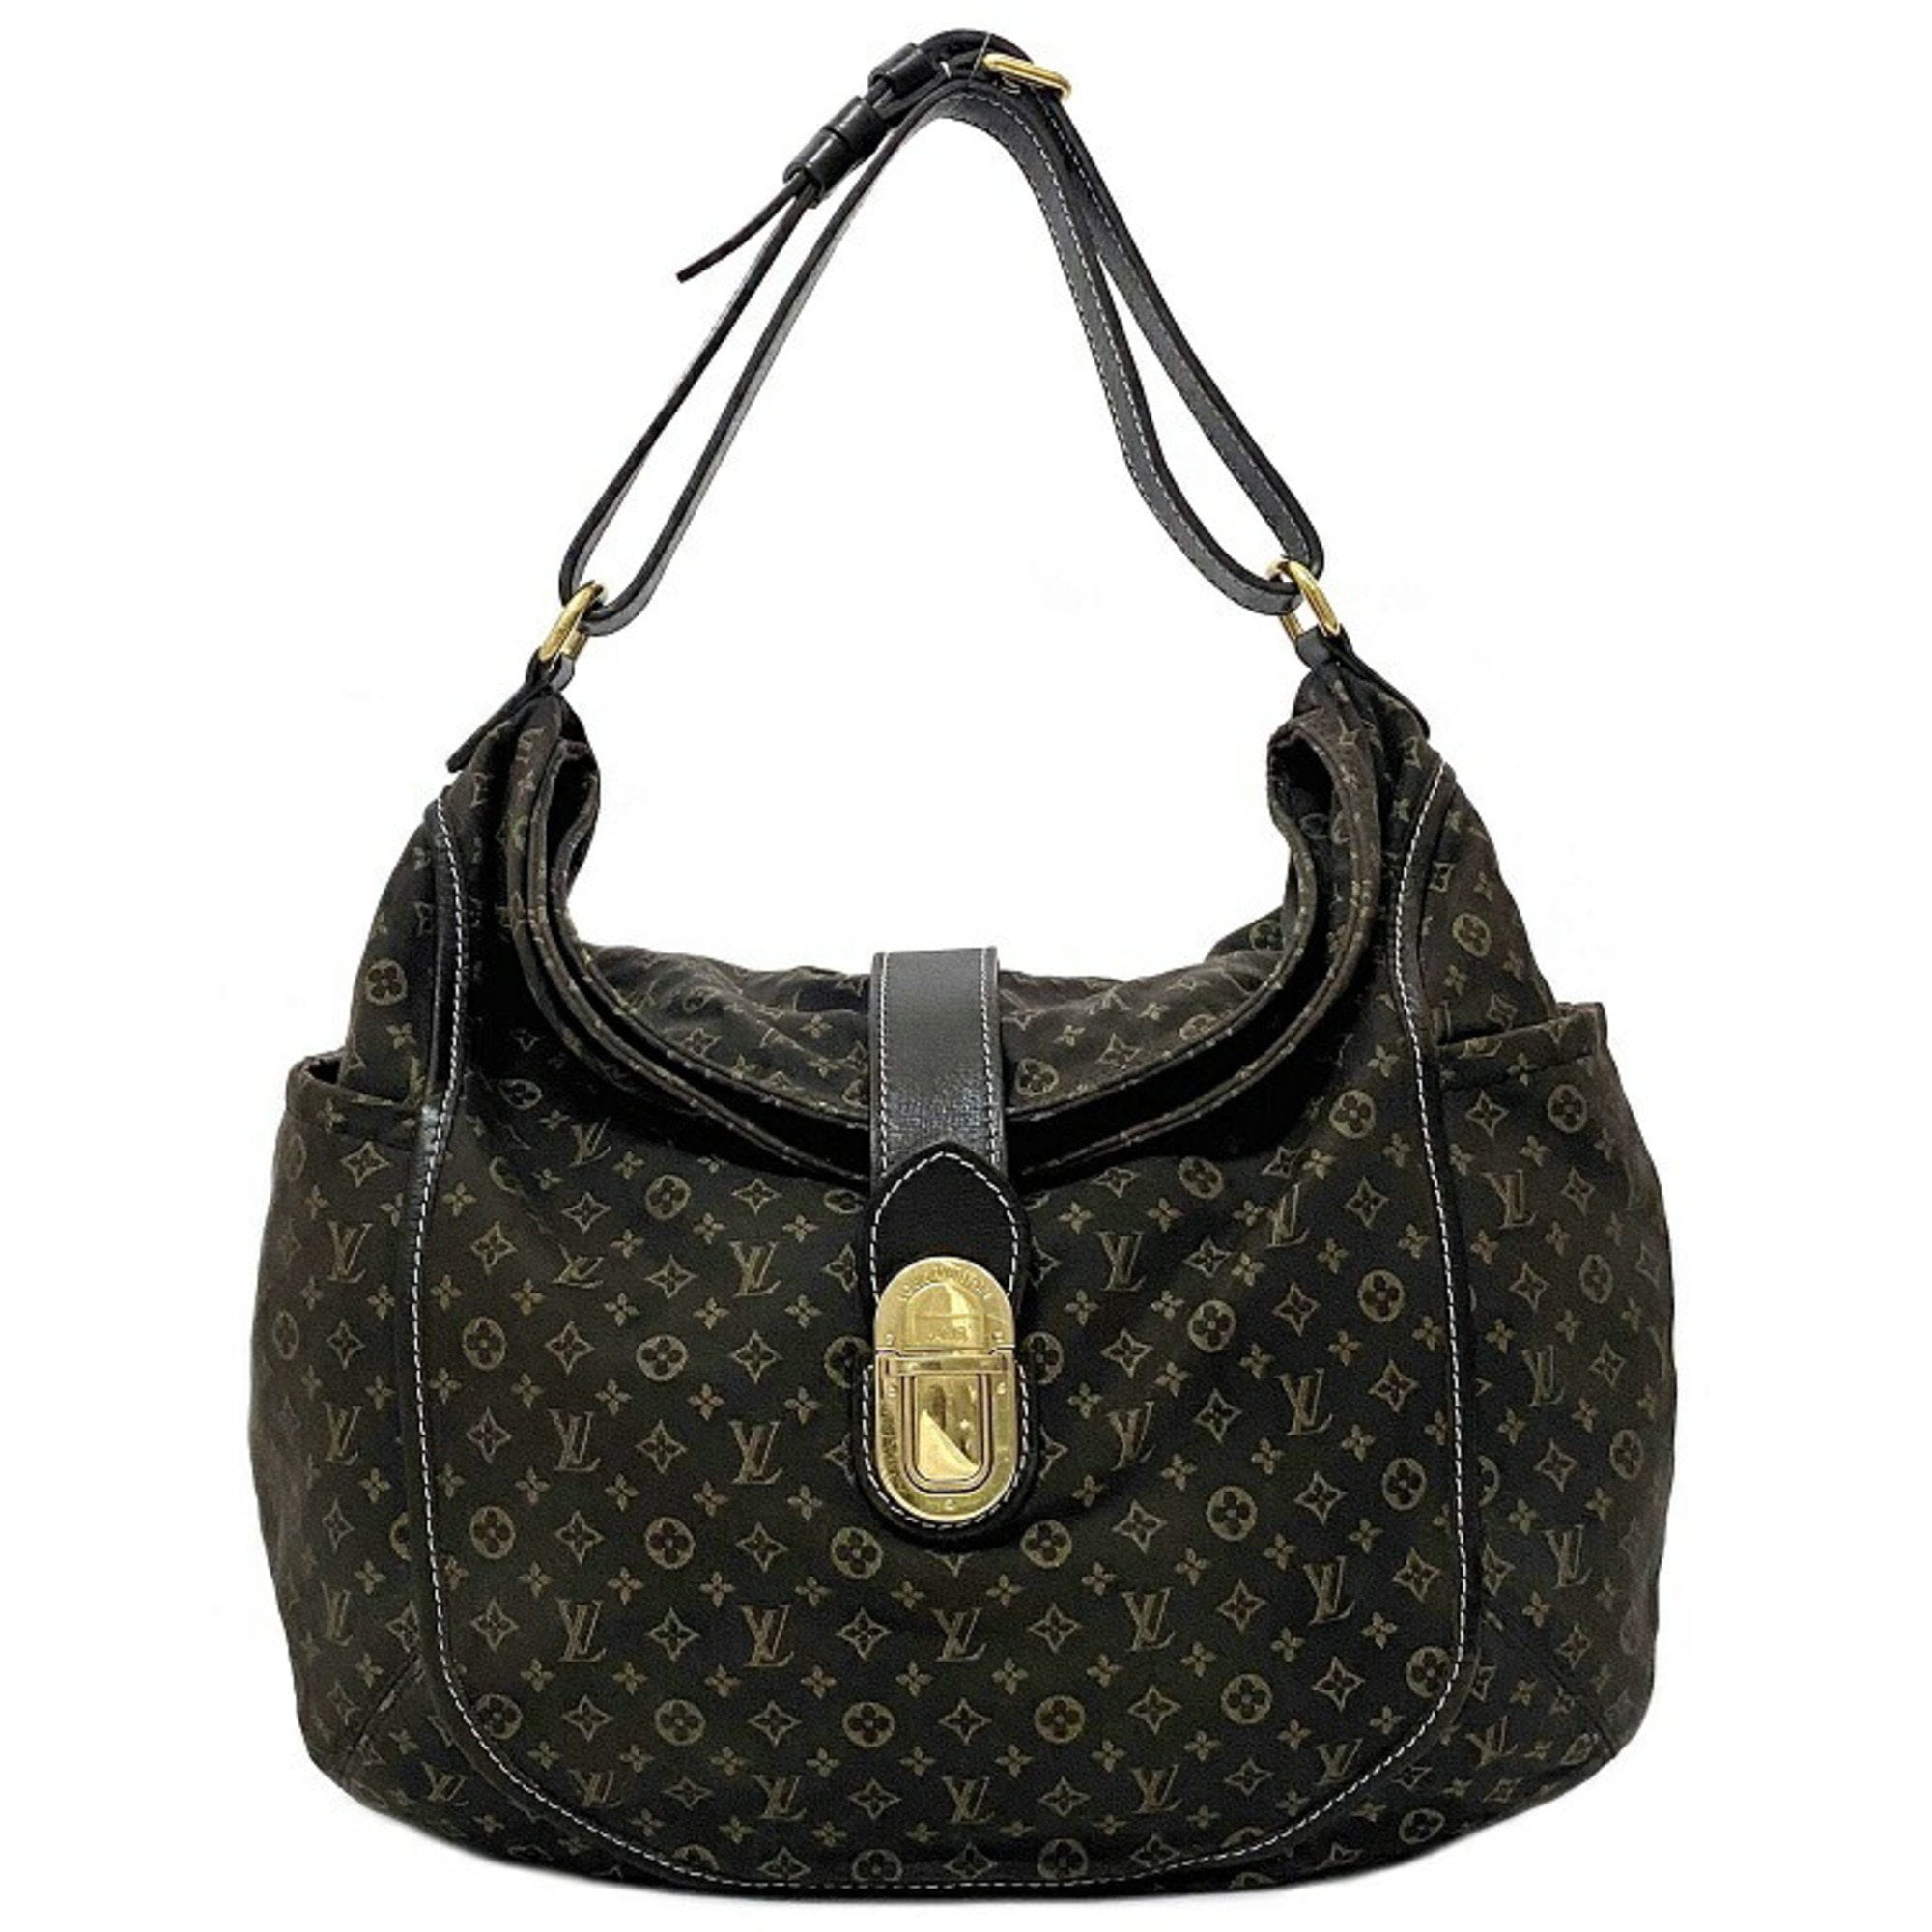 Louis Vuitton lv one handle bag monogram with black leather flap